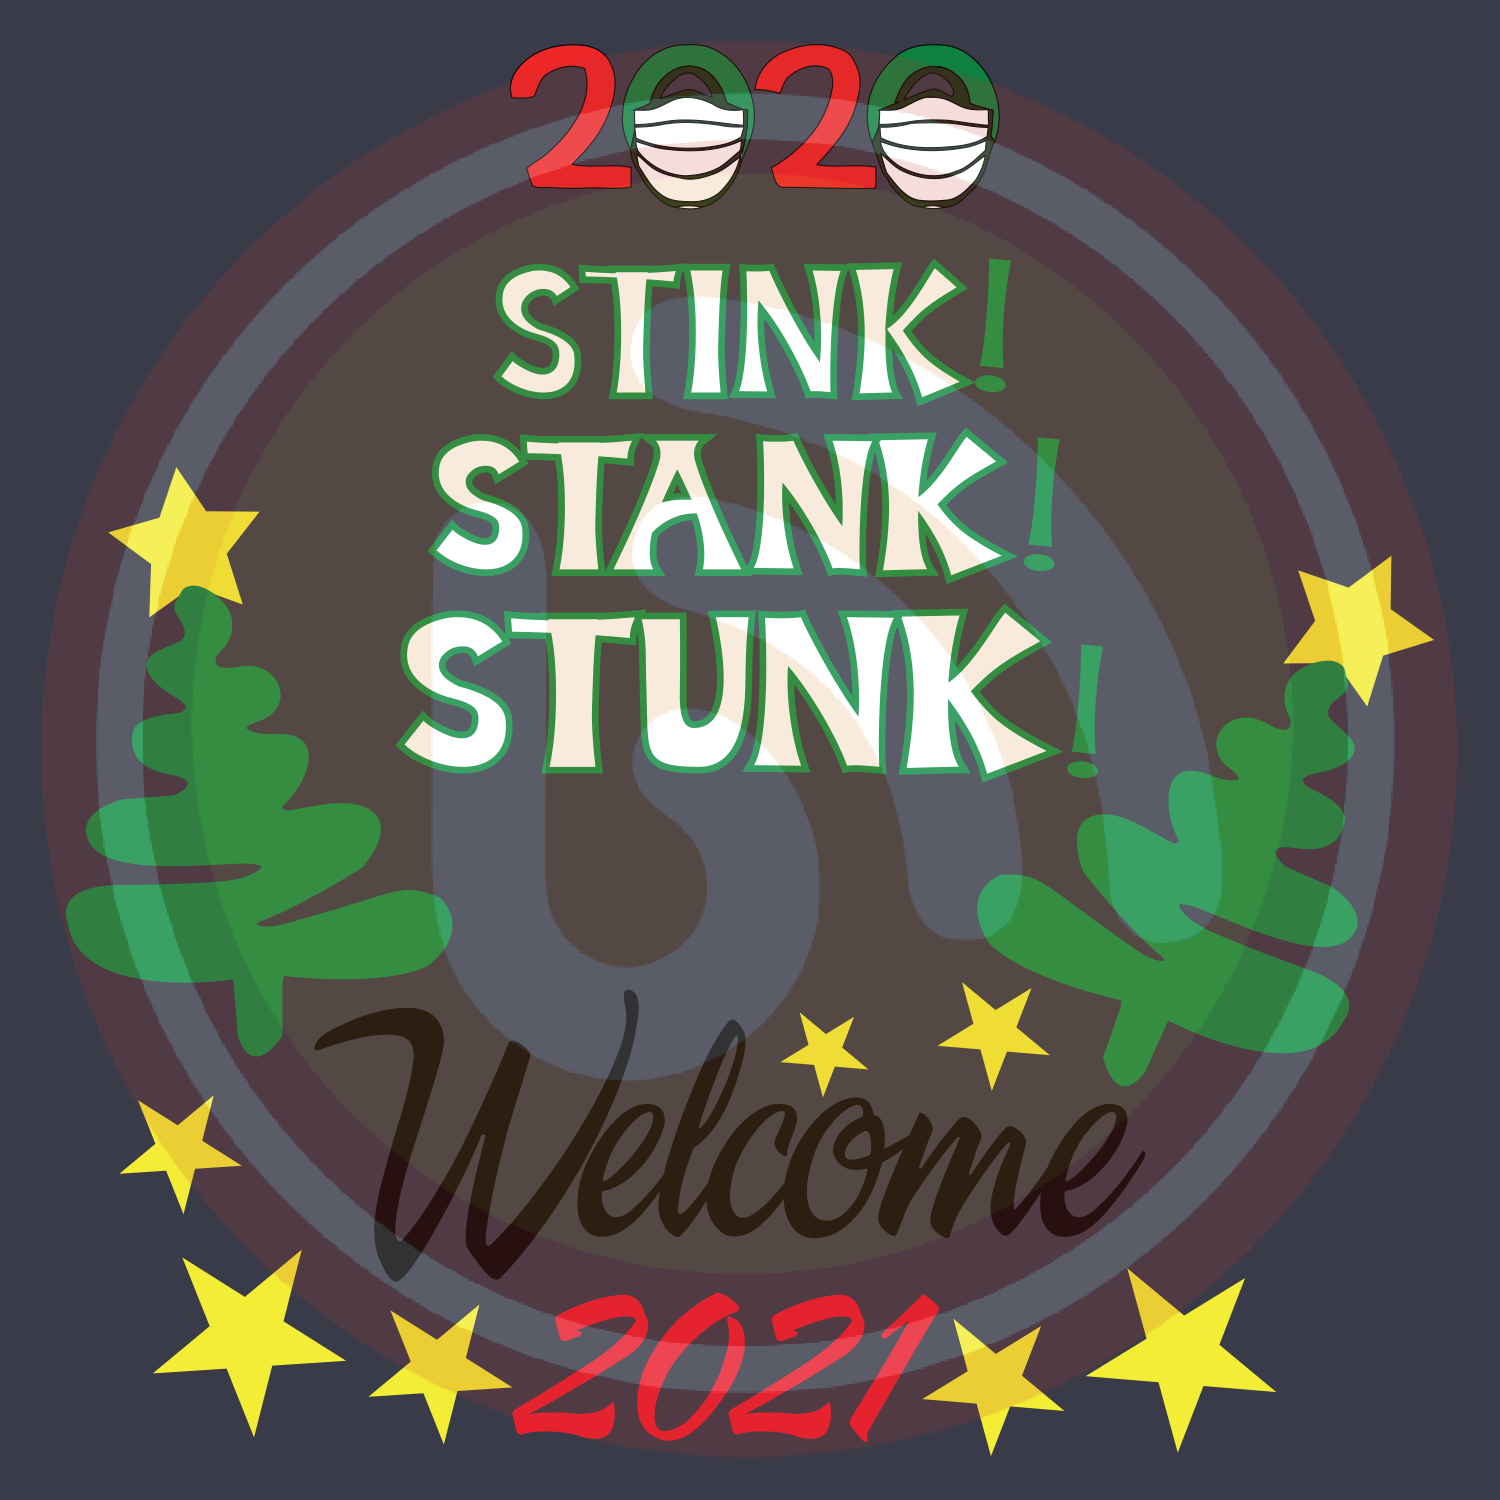 Is Stink Stank Stunk Copyrighted